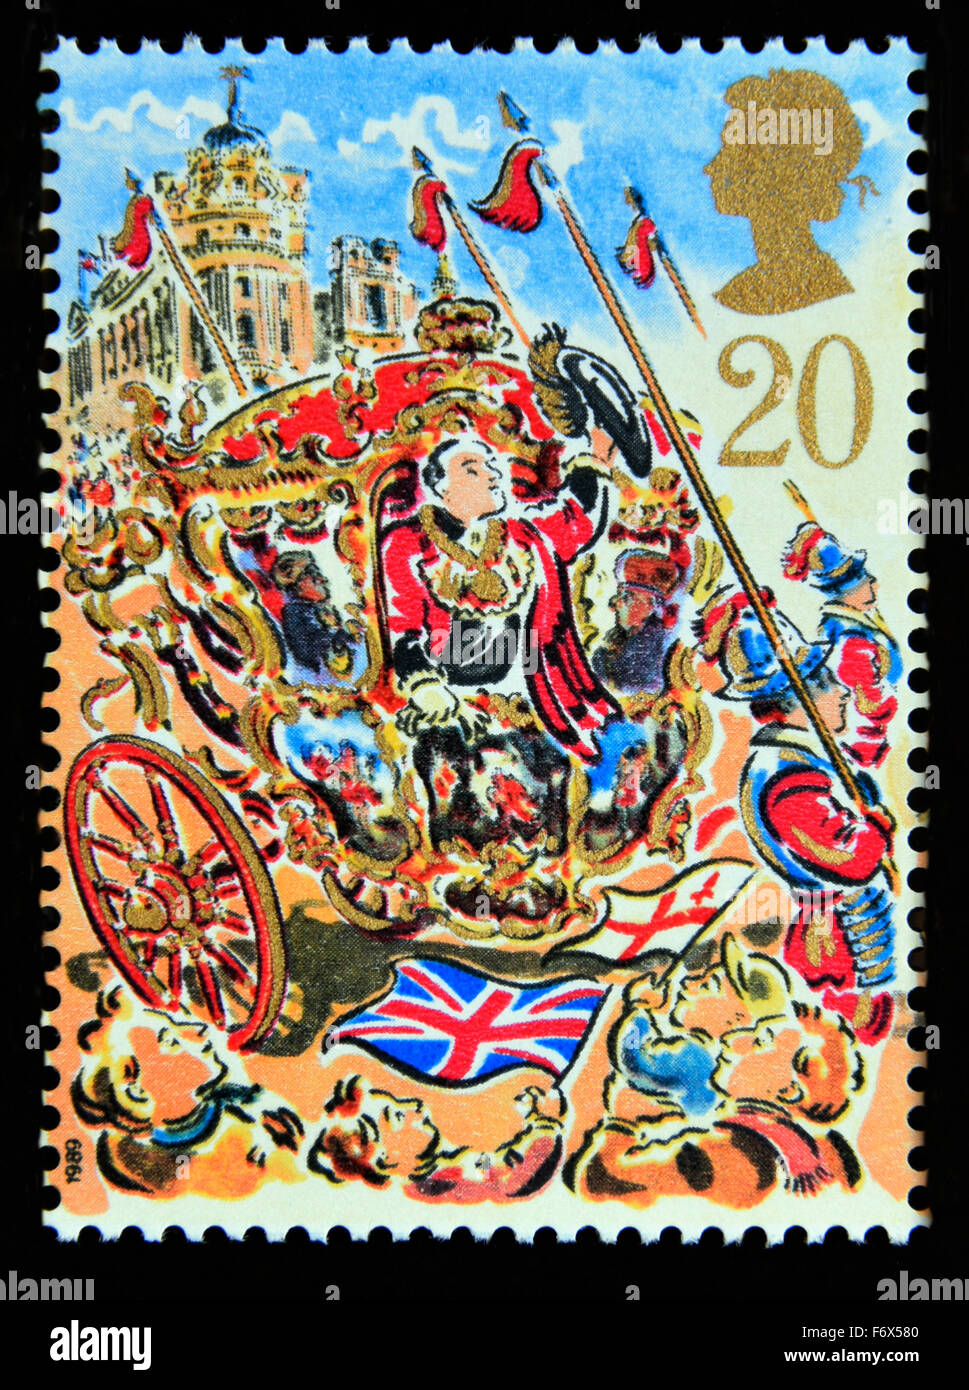 Postage stamp. Great Britain. Queen Elizabeth II. 1989. Lord Mayor's Show, London. Lord Mayor's Coach. 20p. Stock Photo